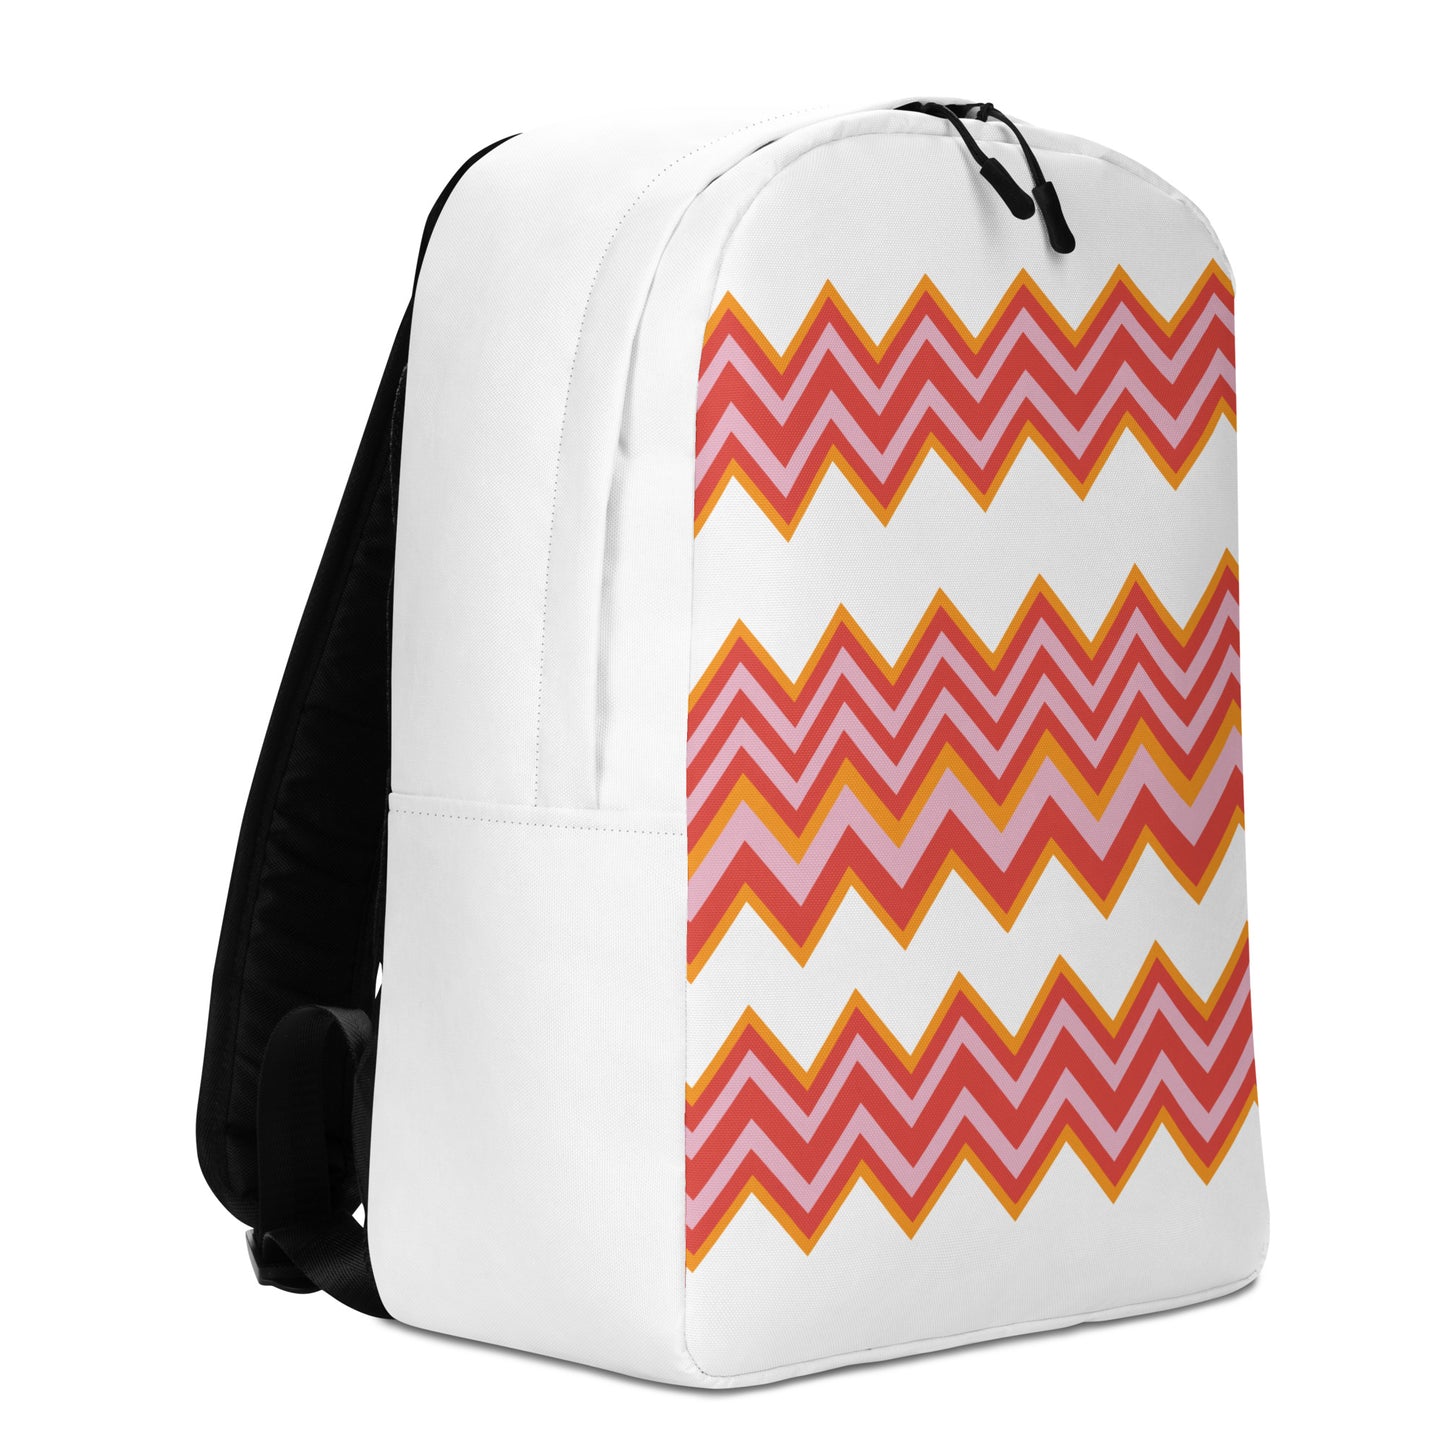 Retro Zigzag - Inspired By Taylor Swift - Sustainably Made Backpack